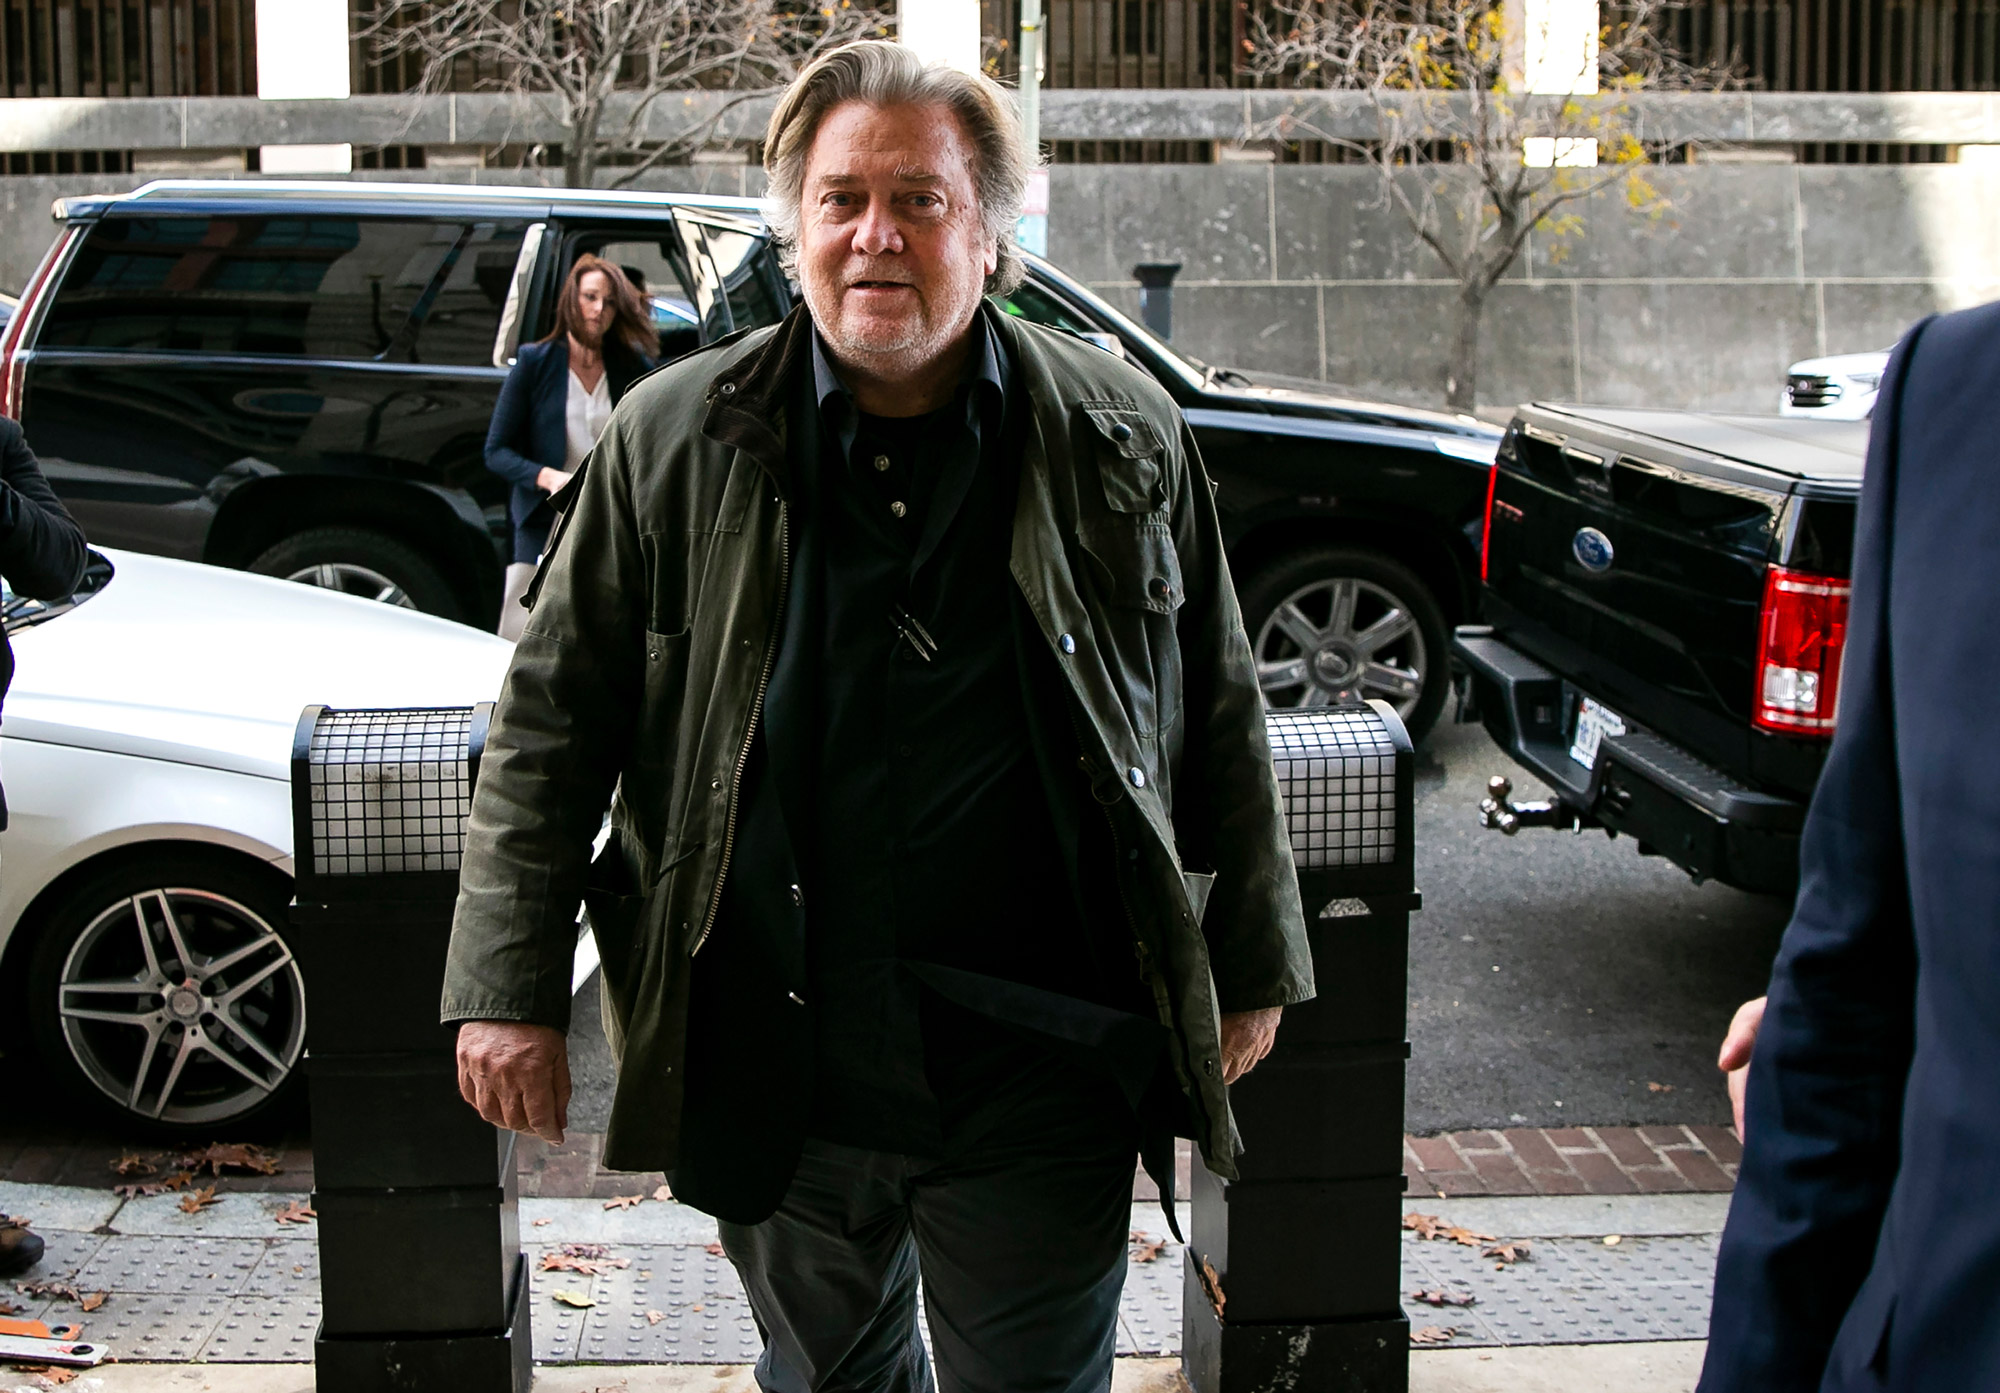 Former White House strategist Steve Bannon arrives to testify at the trial of Roger Stone at a federal court in Washington, DC, on November 8, 2019.